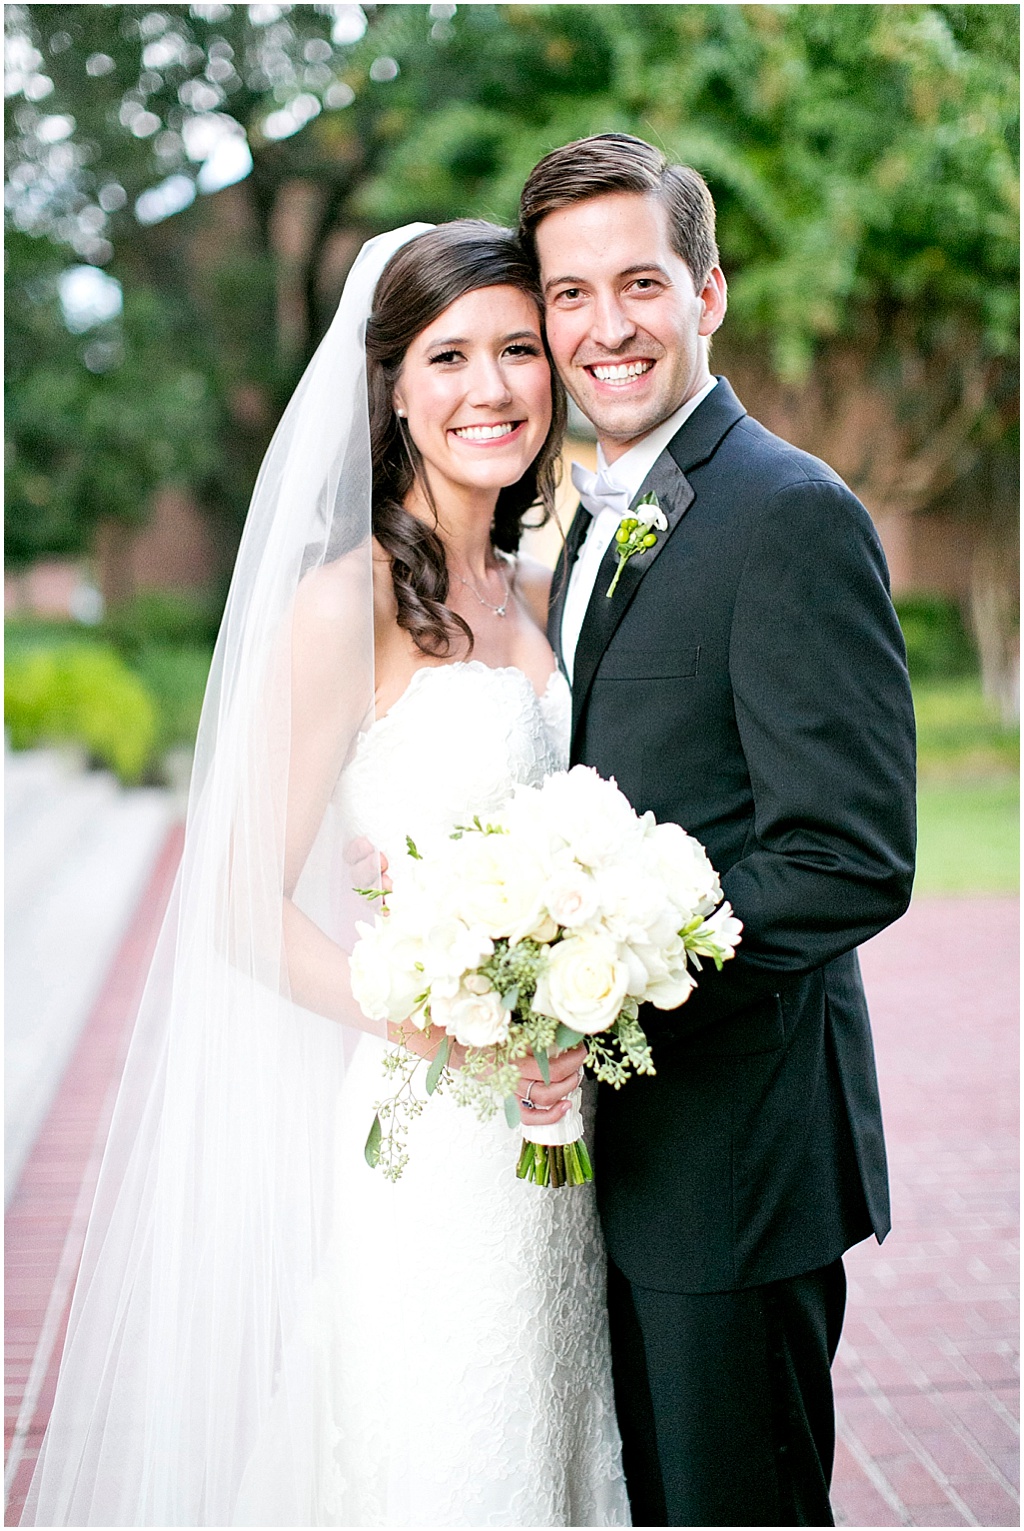 View More: http://maryfieldsphotography.pass.us/blades-wedding-8-15-15